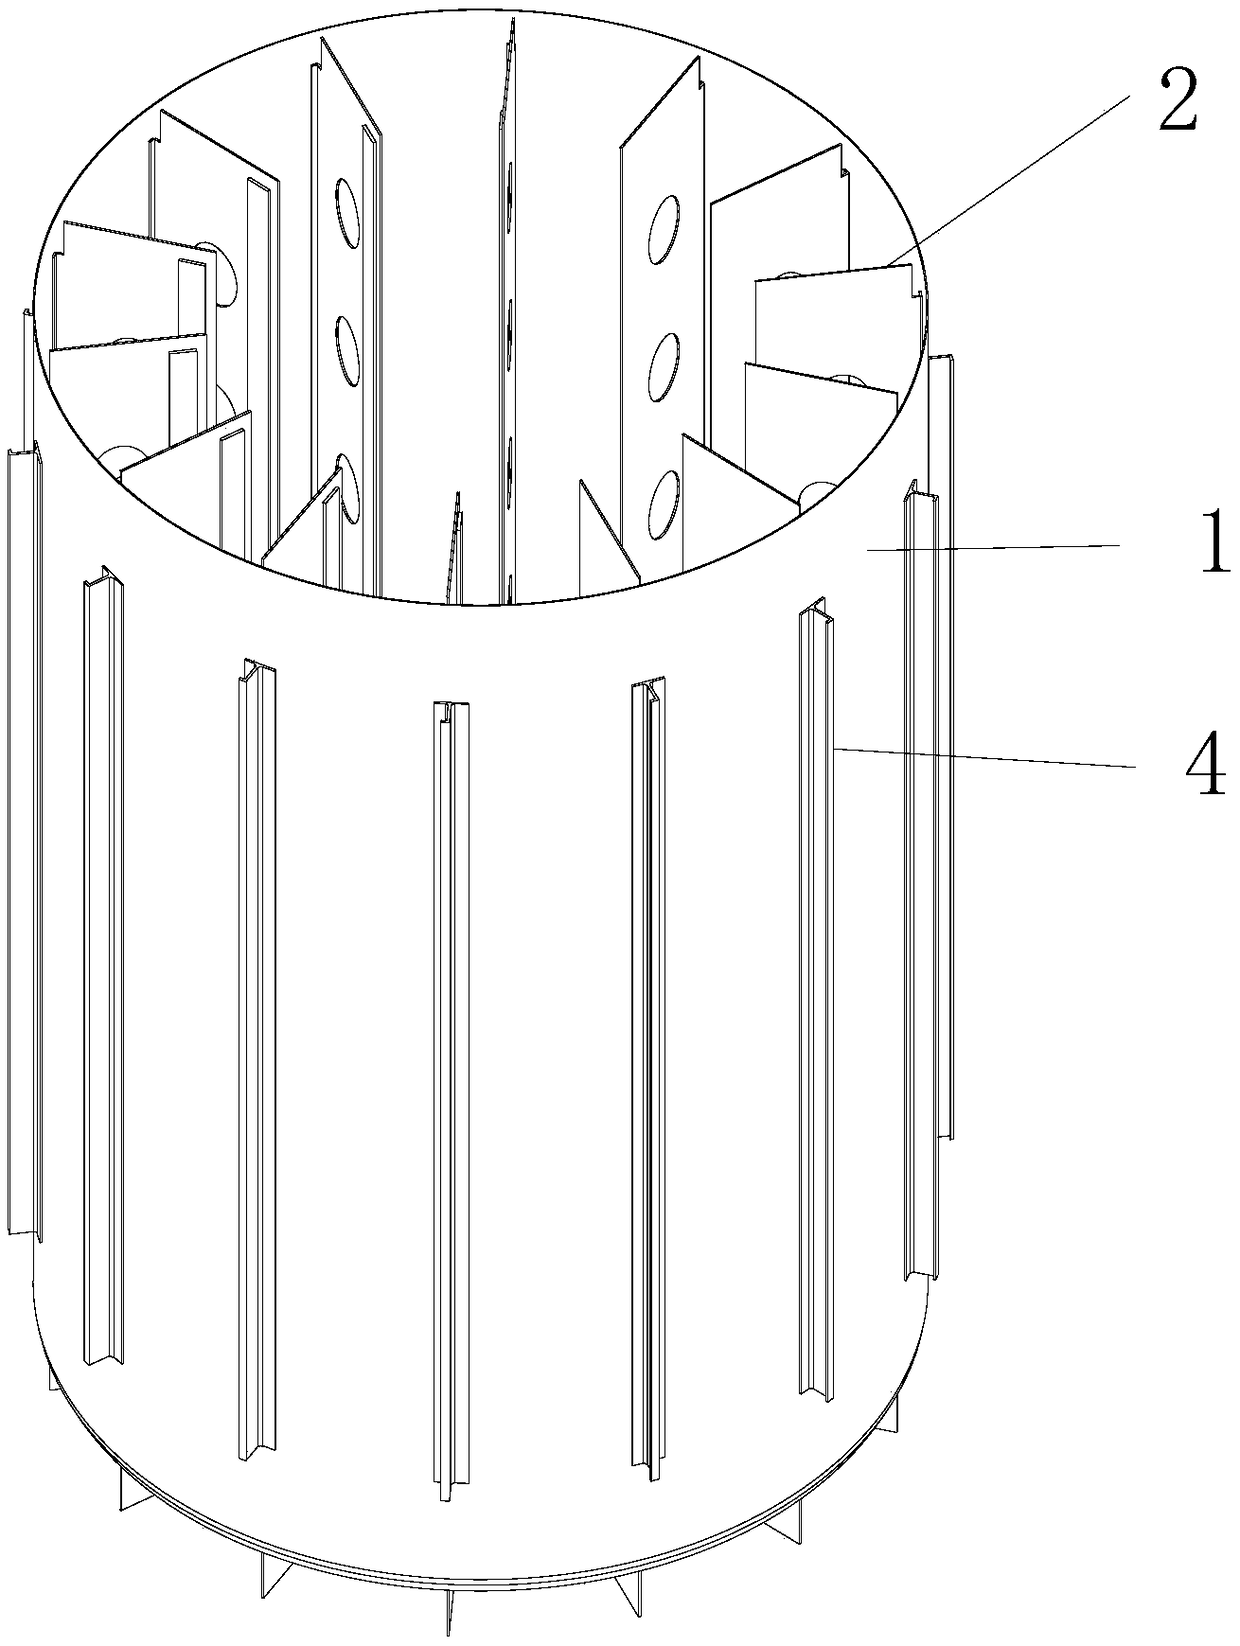 Novel holder-type electrode shell structure and installation butting process thereof